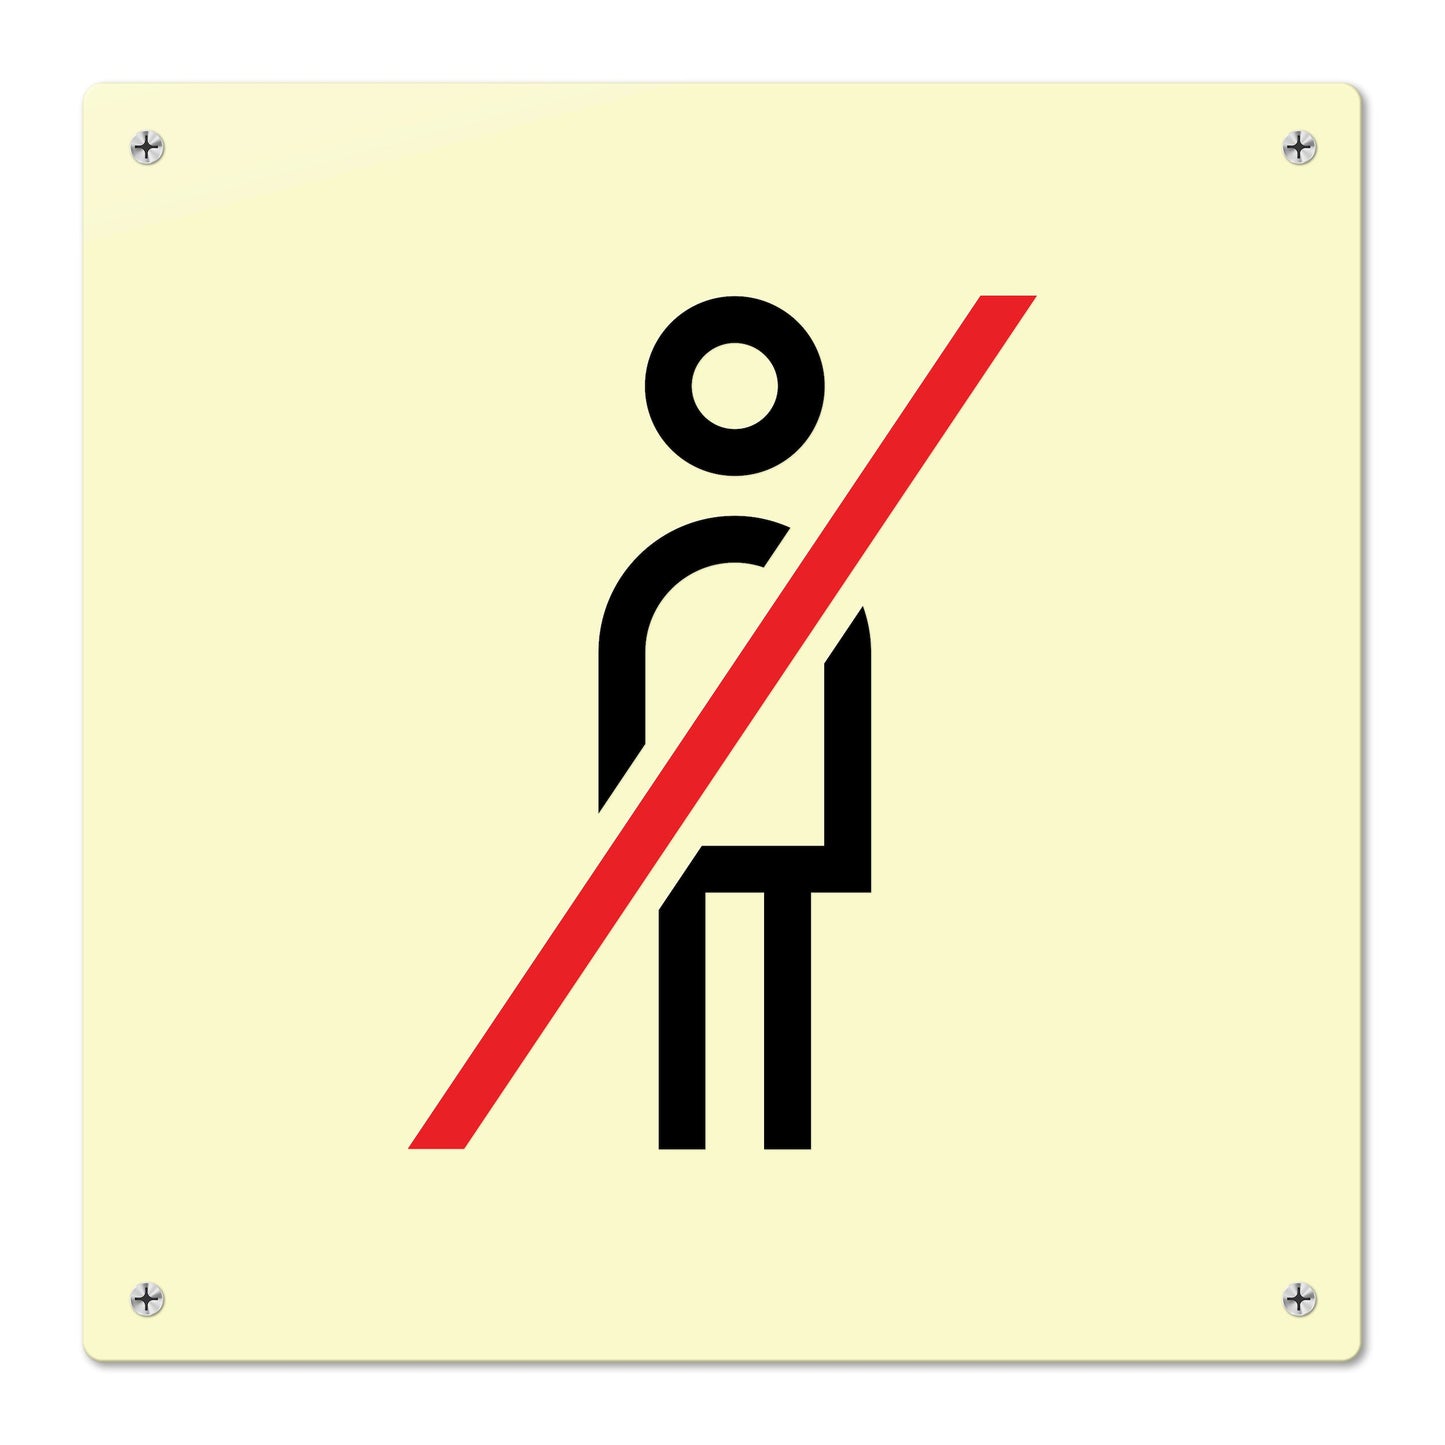 Authorised Personnel Only (Pictogram)